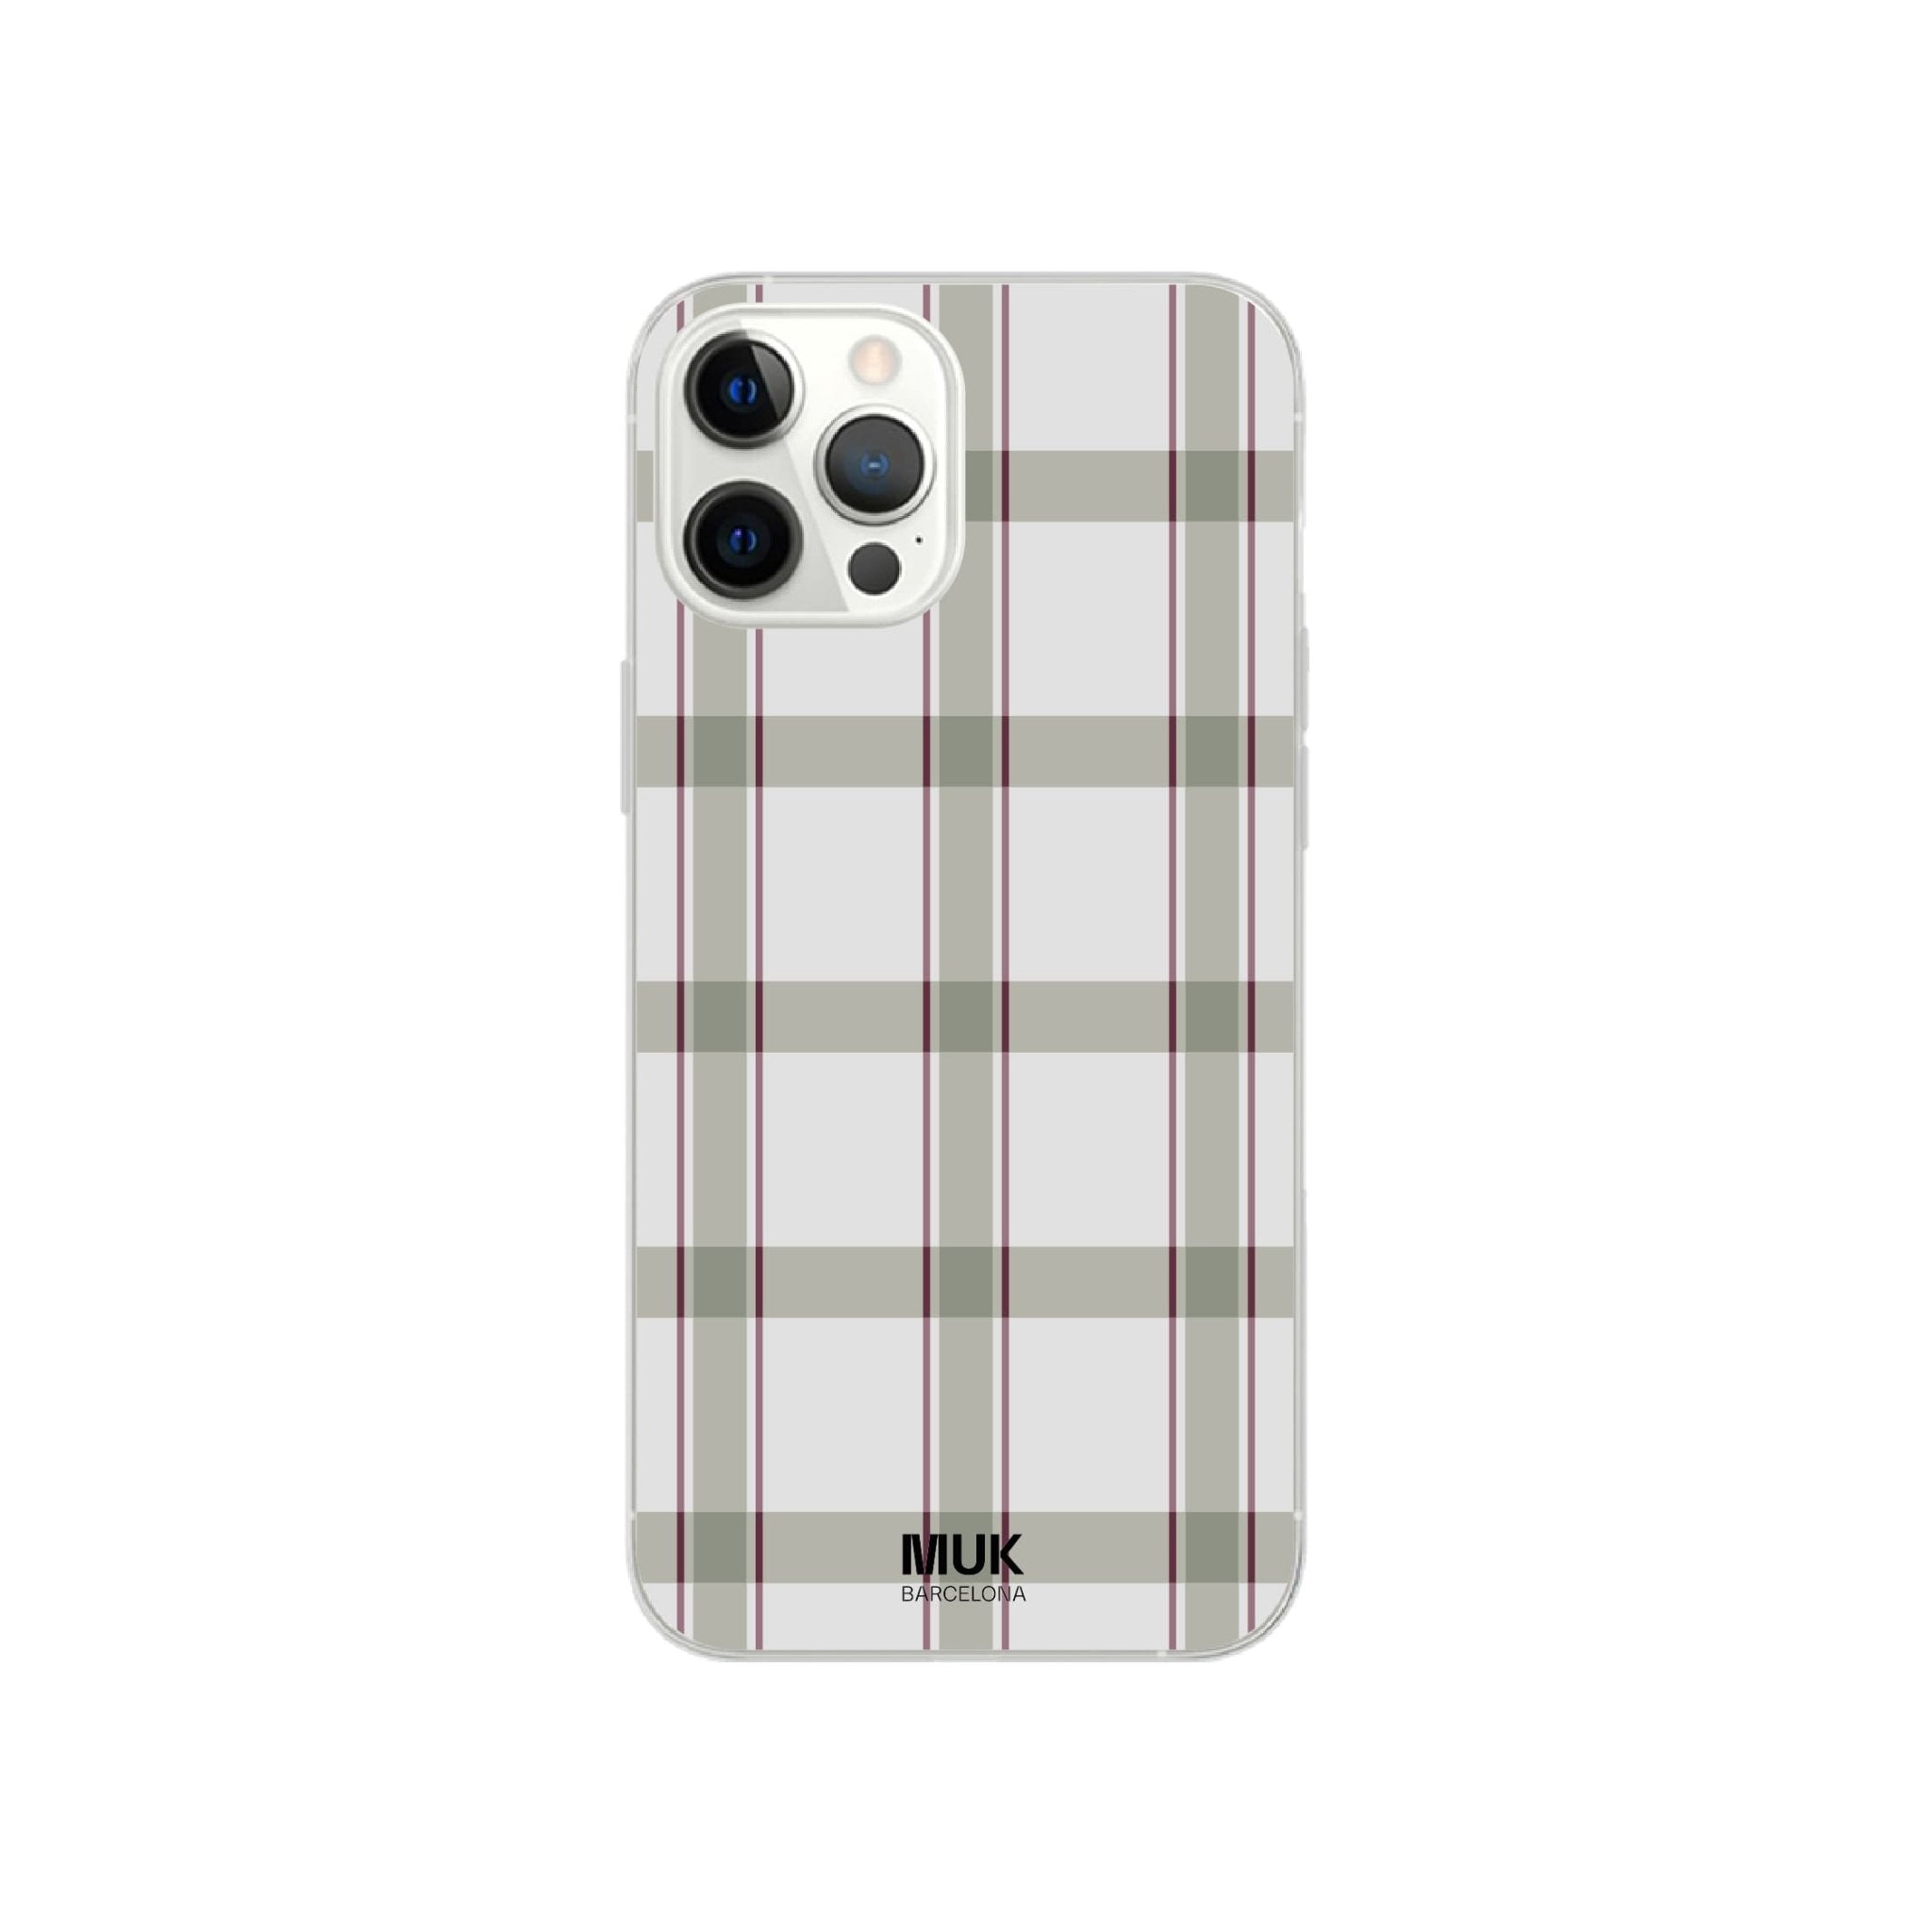 Clear phone case with stripes/squares pattern in beige, green and maroon.
